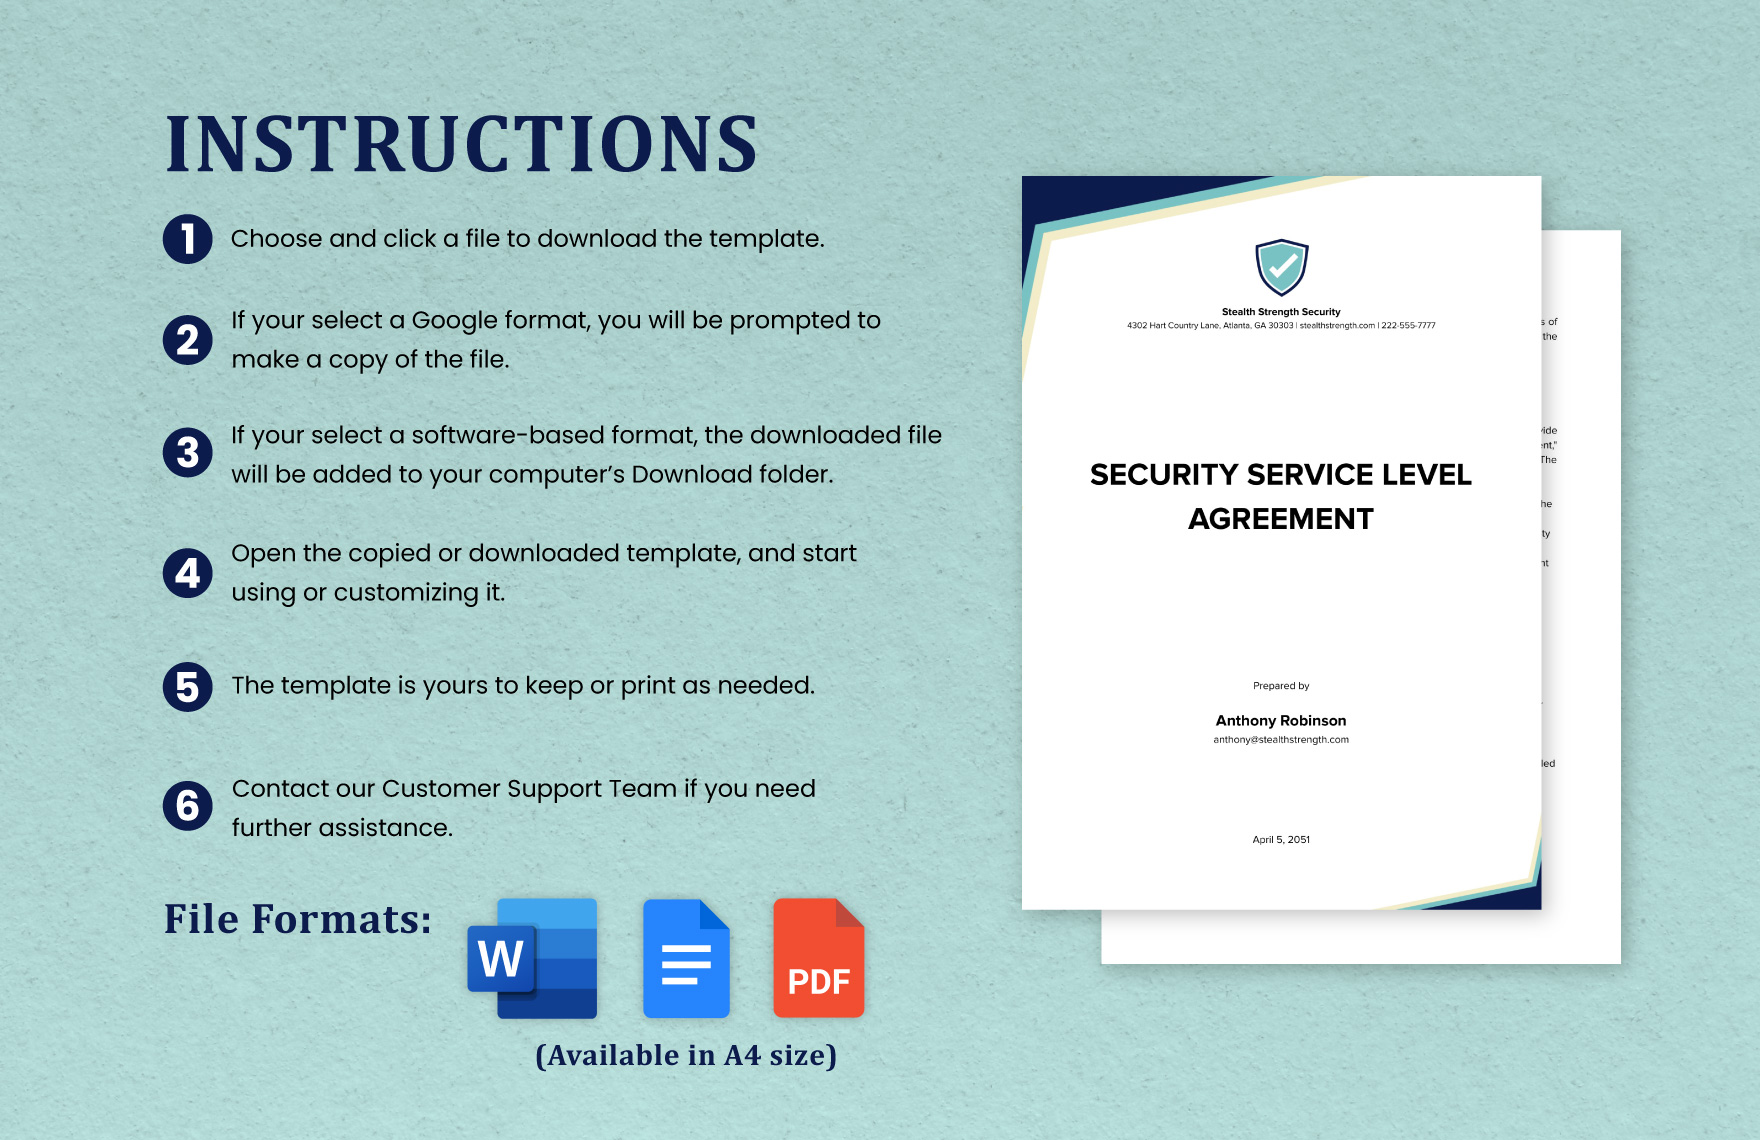 Security Service Level Agreement Template